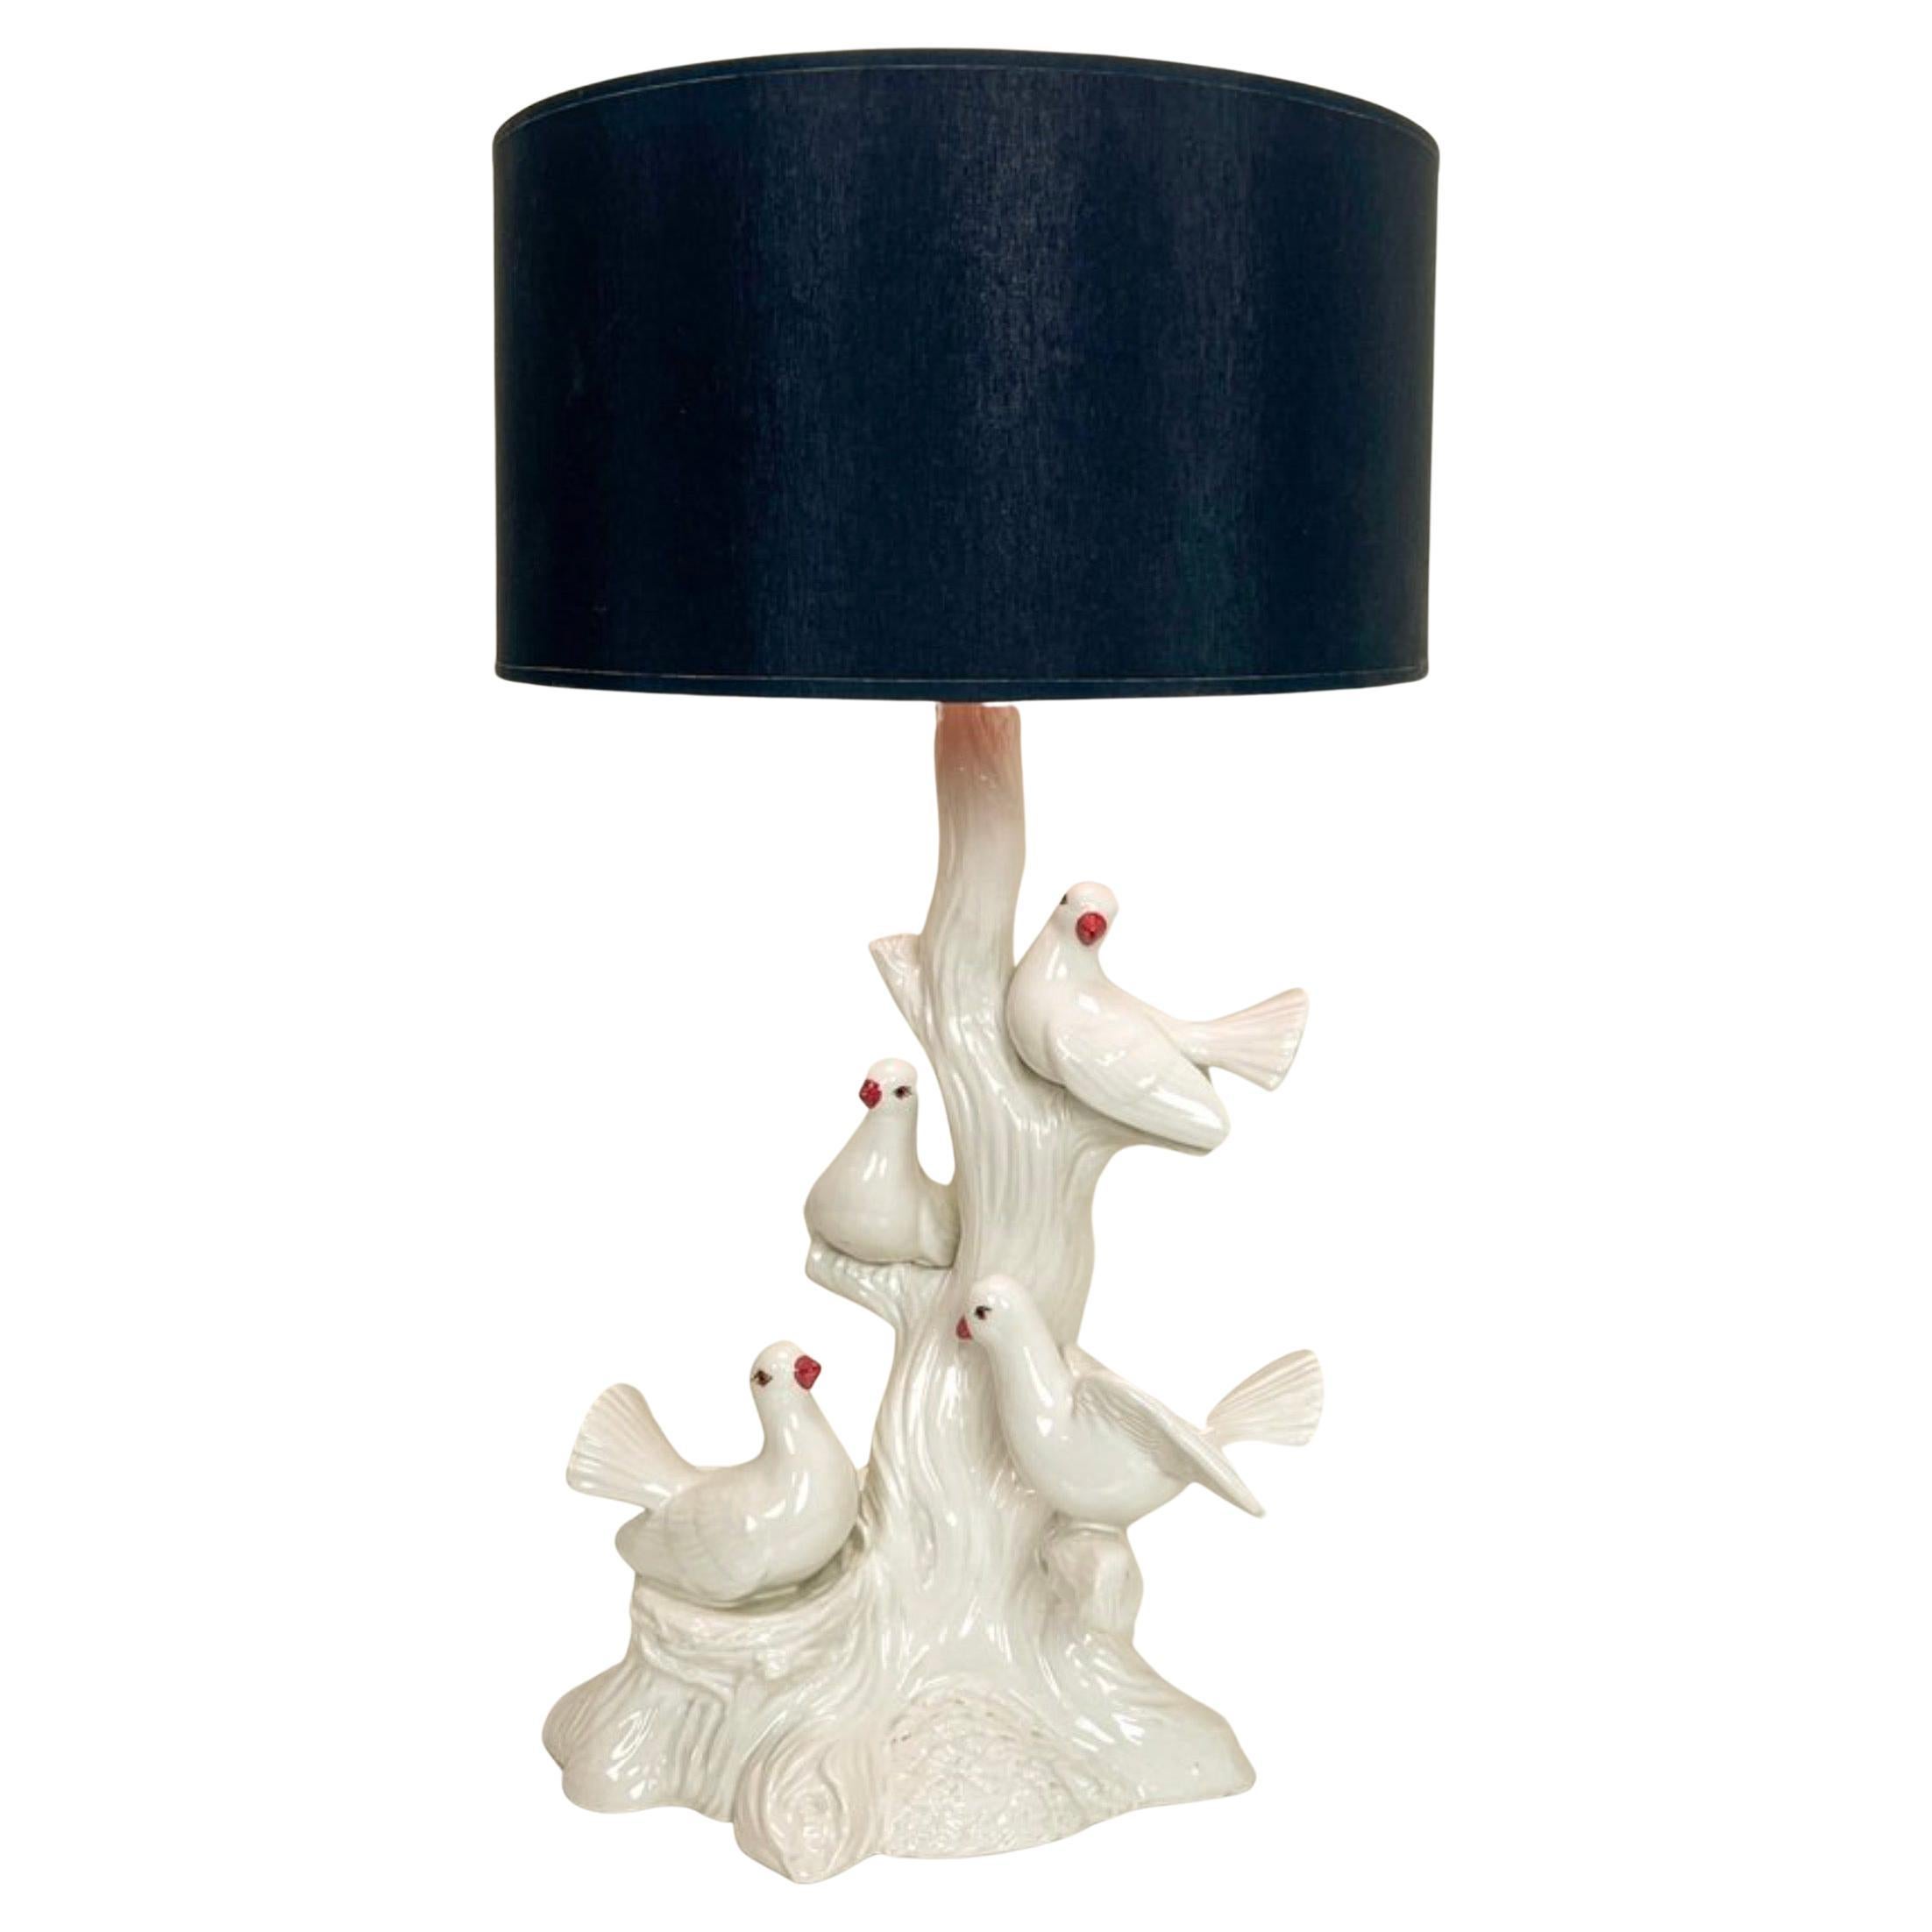 Vintage Italian Ceramic Bird Table Lamp with Doves, 1960s For Sale